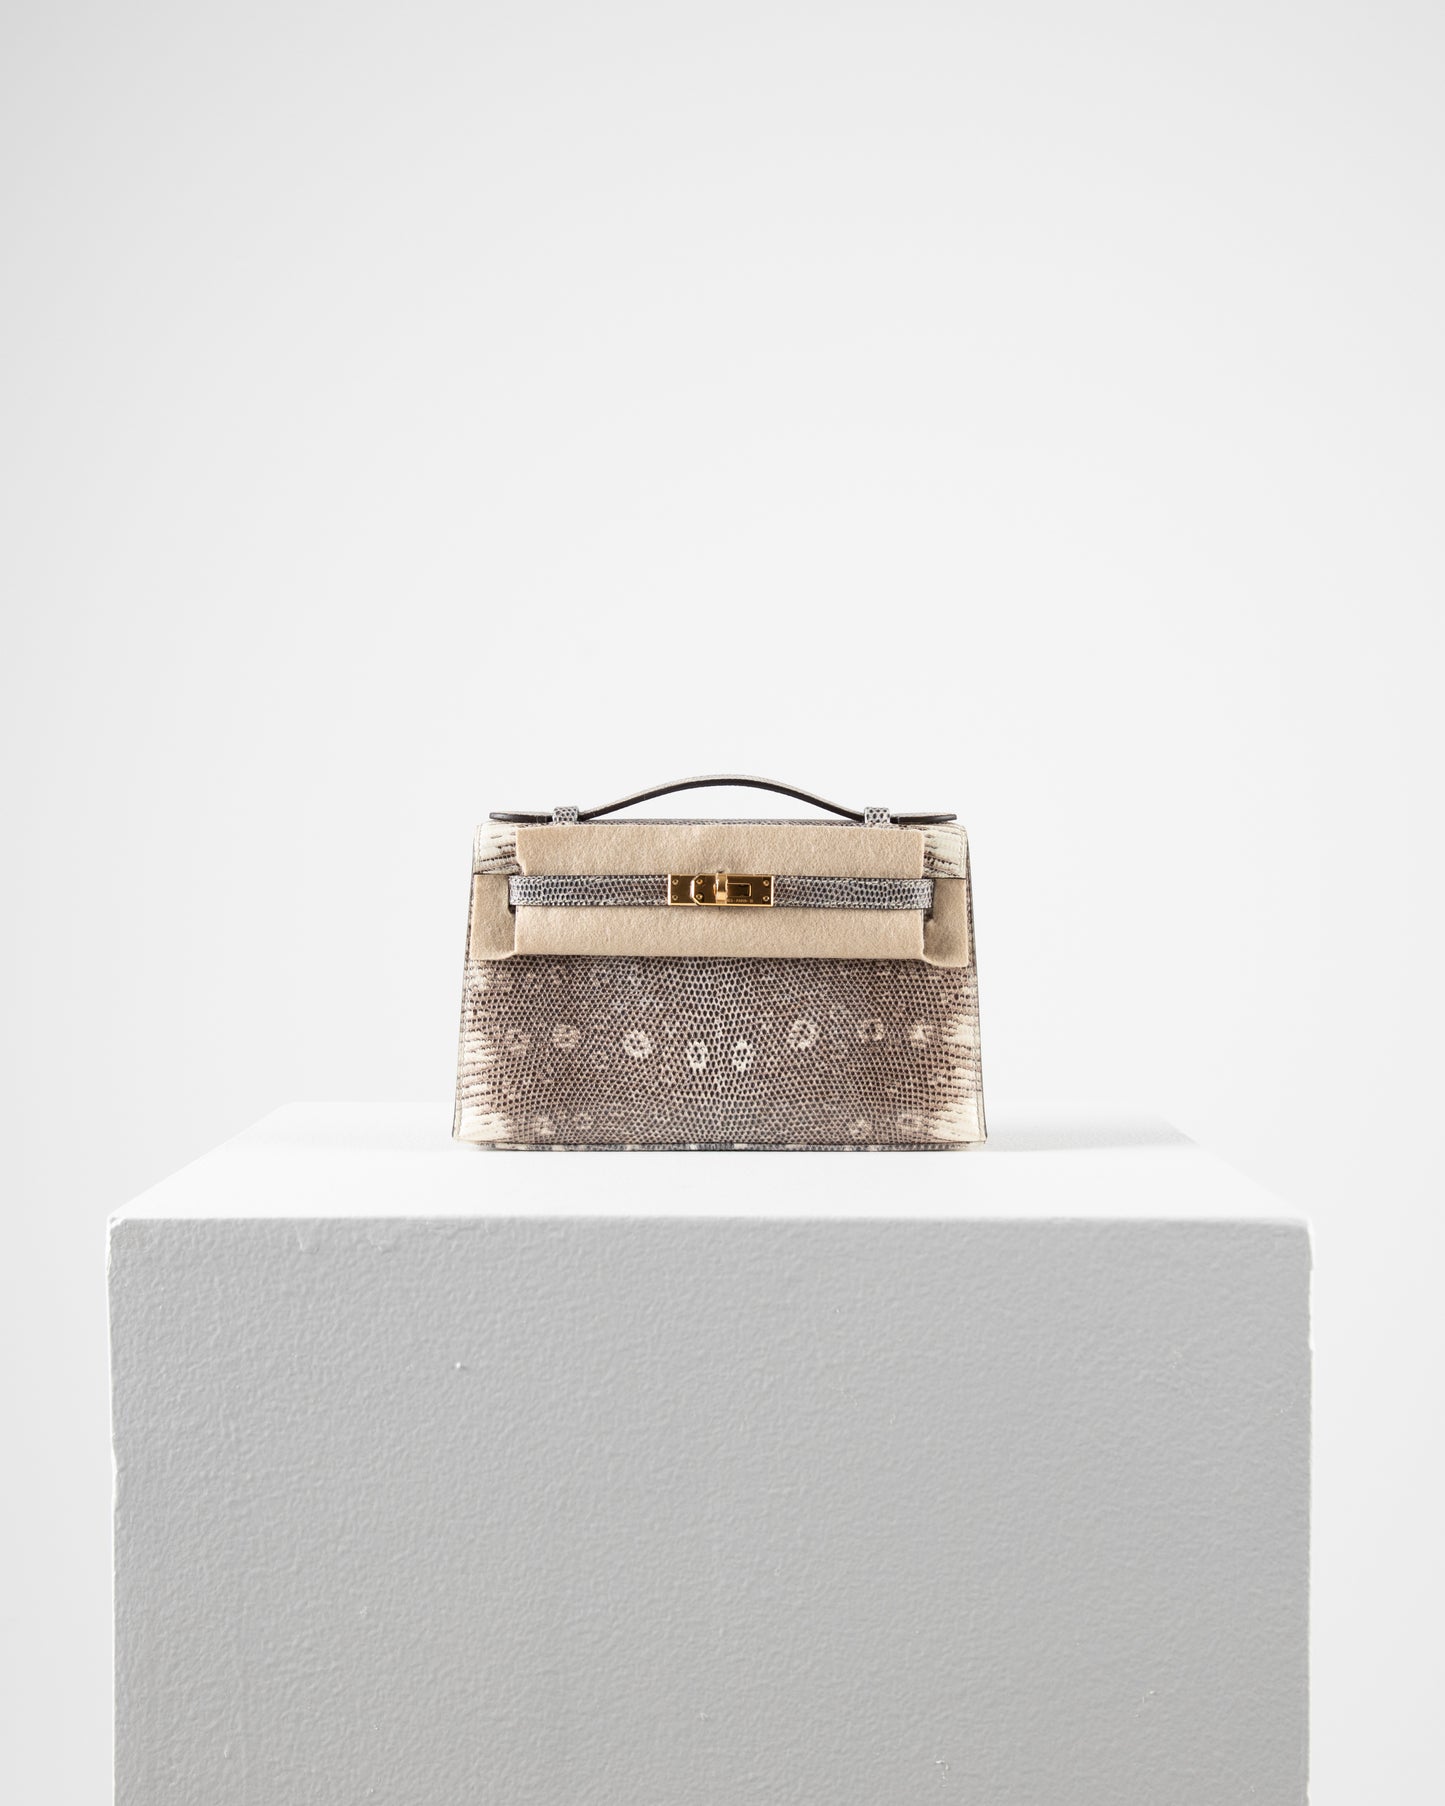 Kelly Pochette in Ombre Lizard with Gold Hardware